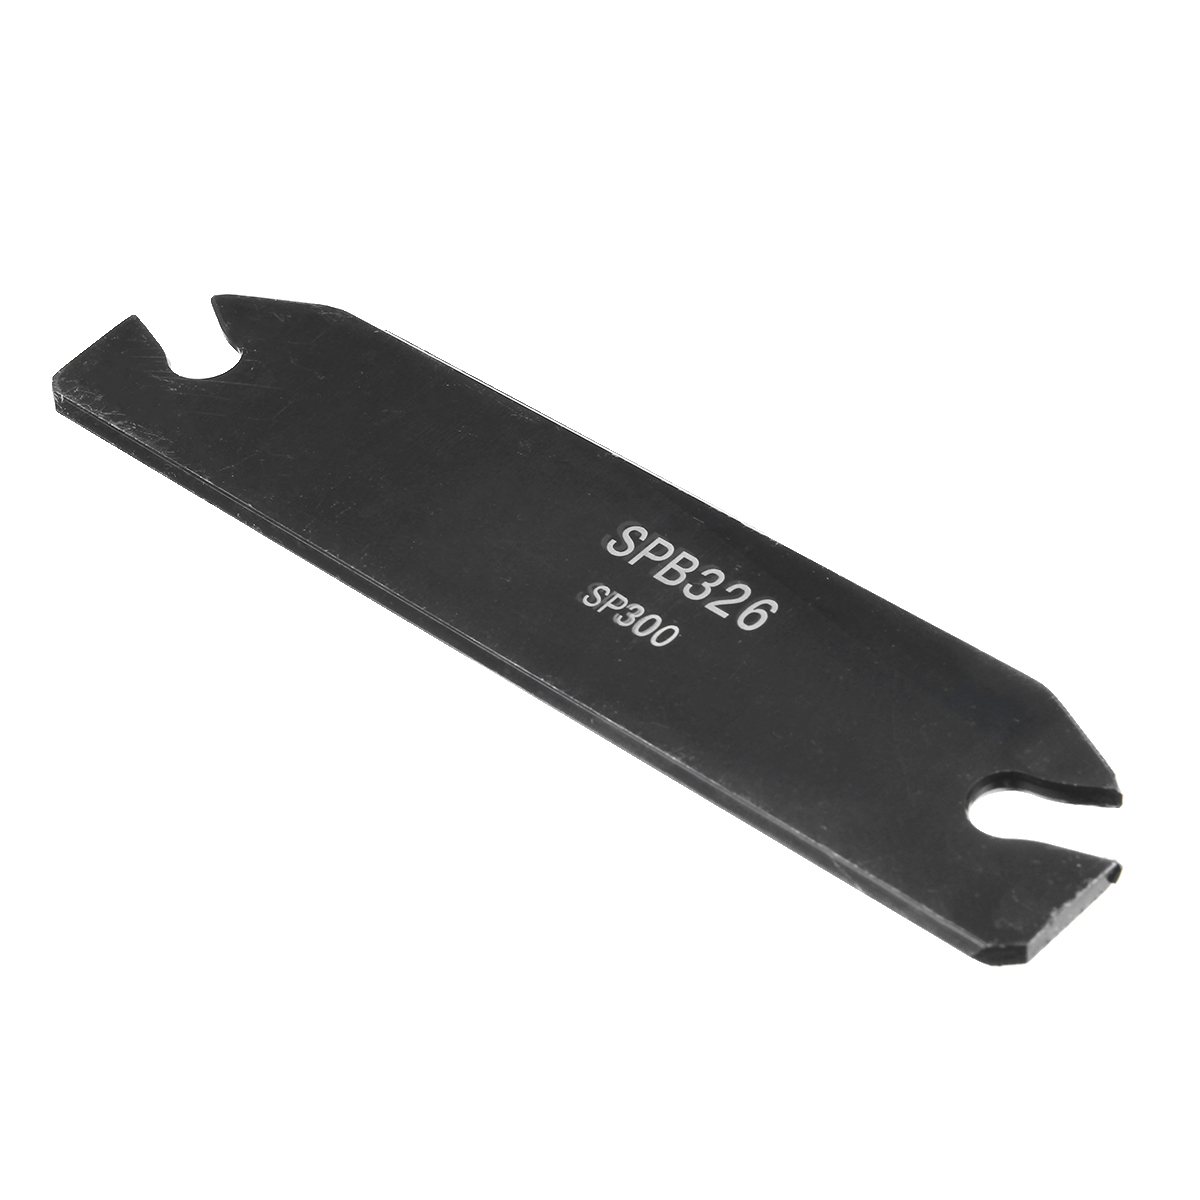 

SPB26-3 26mm Parting Grooving Cut-Off Tool Holder for ZQMX3N11-1E SP300 YBC251 Cut Off Grooving Inserts